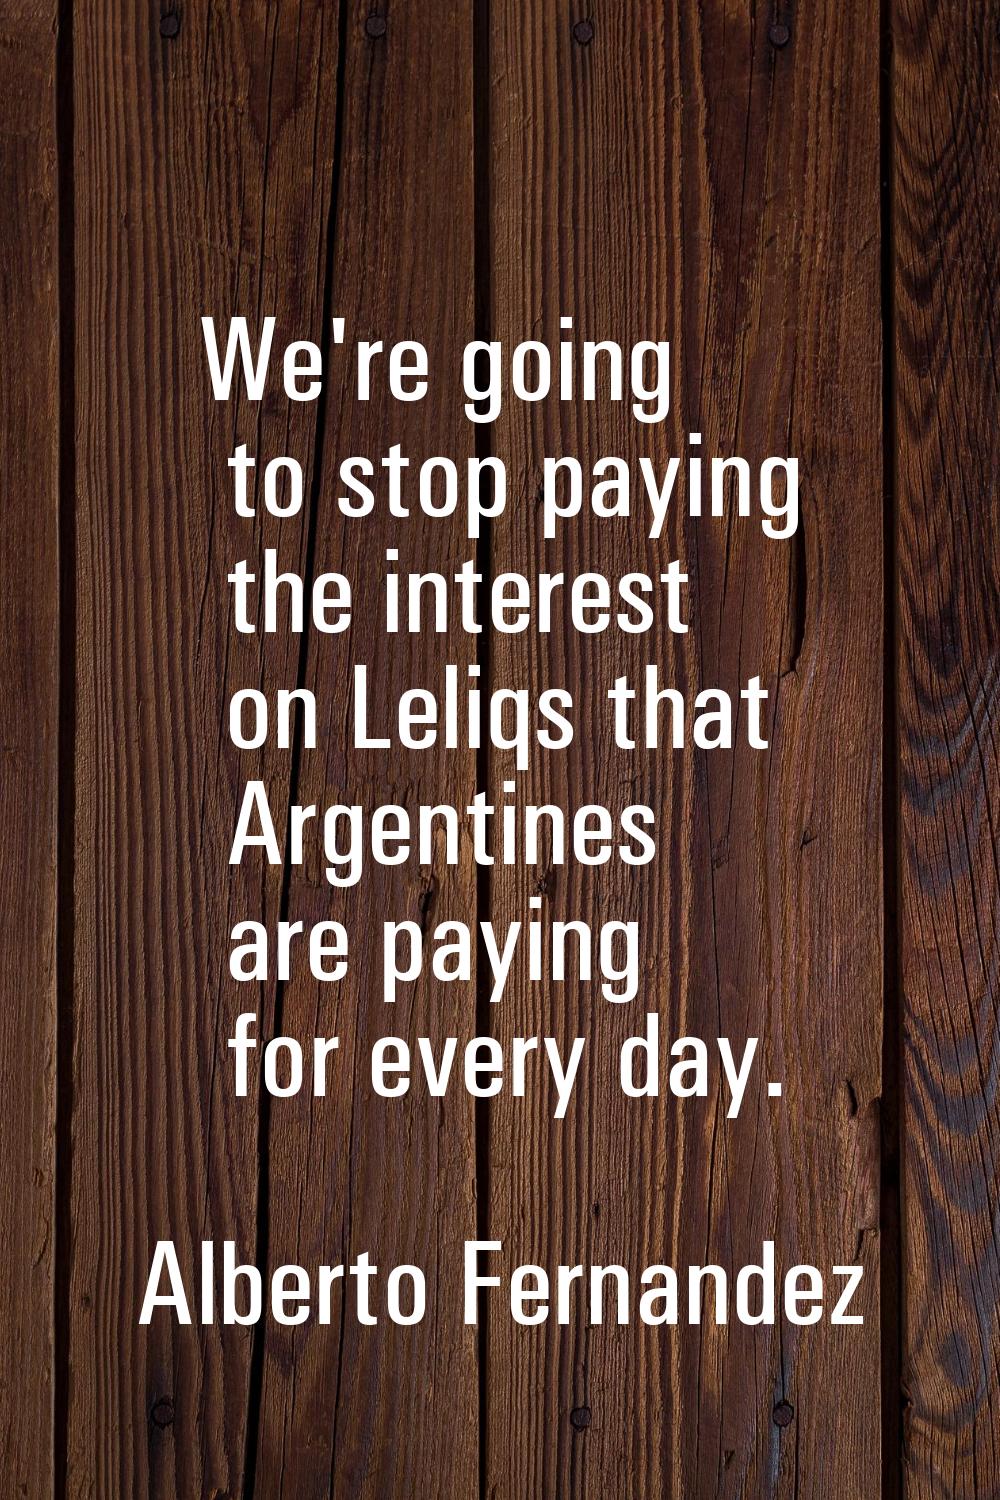 We're going to stop paying the interest on Leliqs that Argentines are paying for every day.